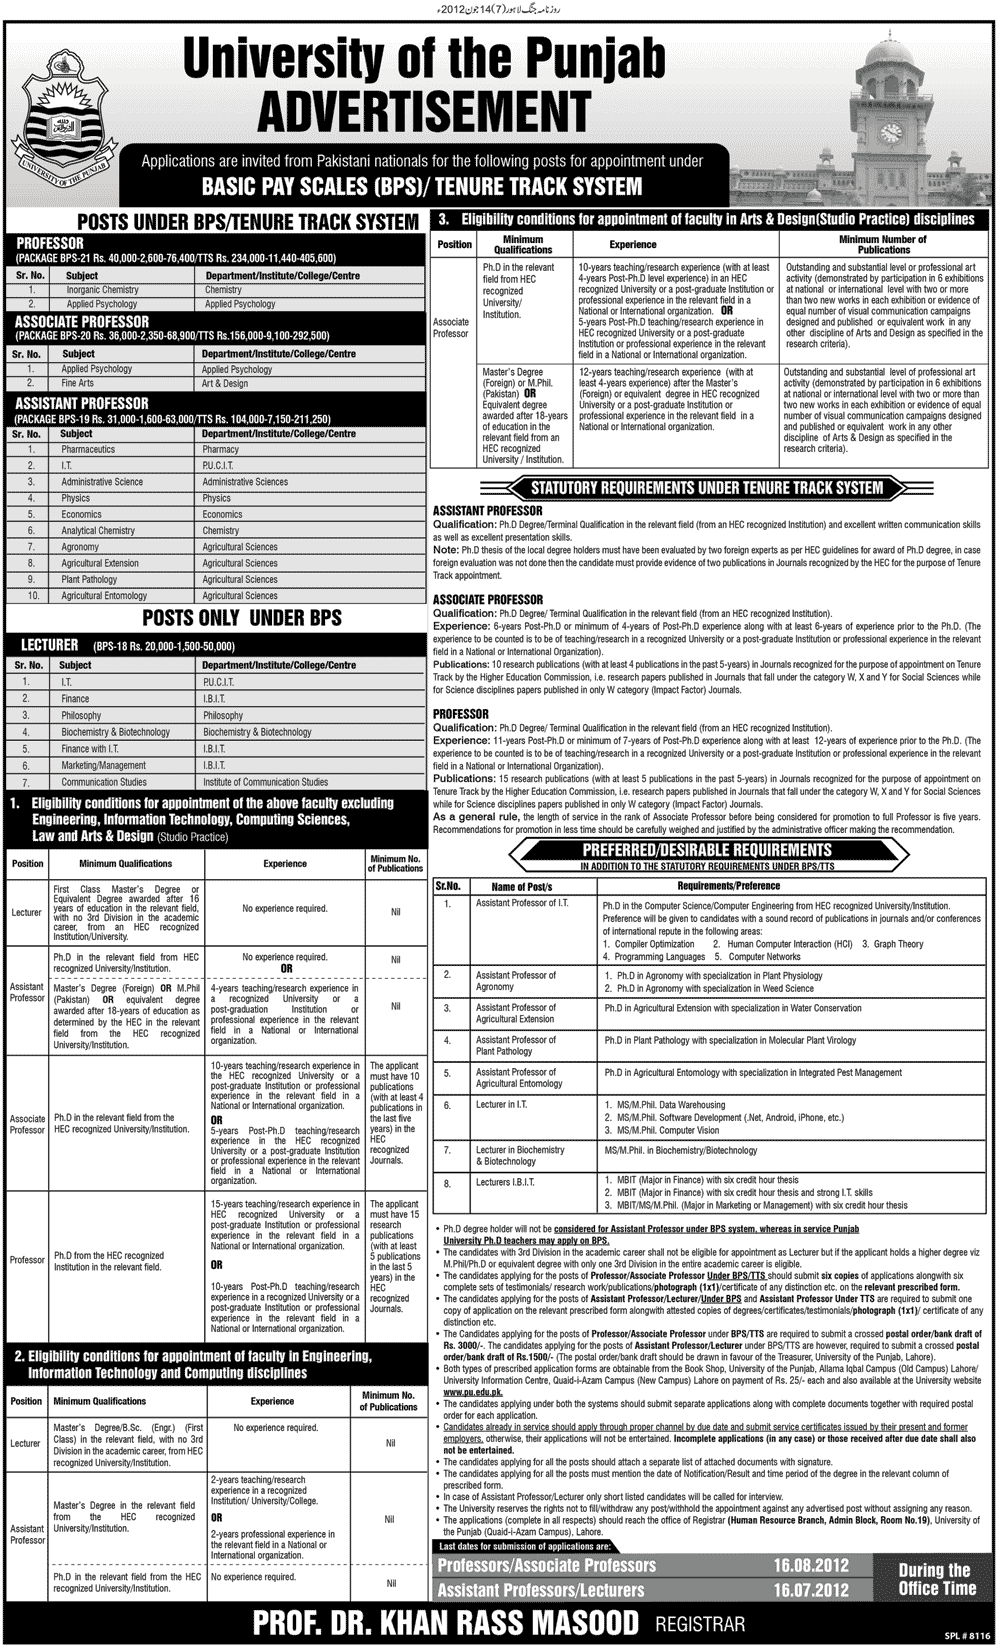 Teaching Faculty Required Under BPS (Basic Pay Scale)/ Tenure Track System (TTS) at University of the Punjab (PU)